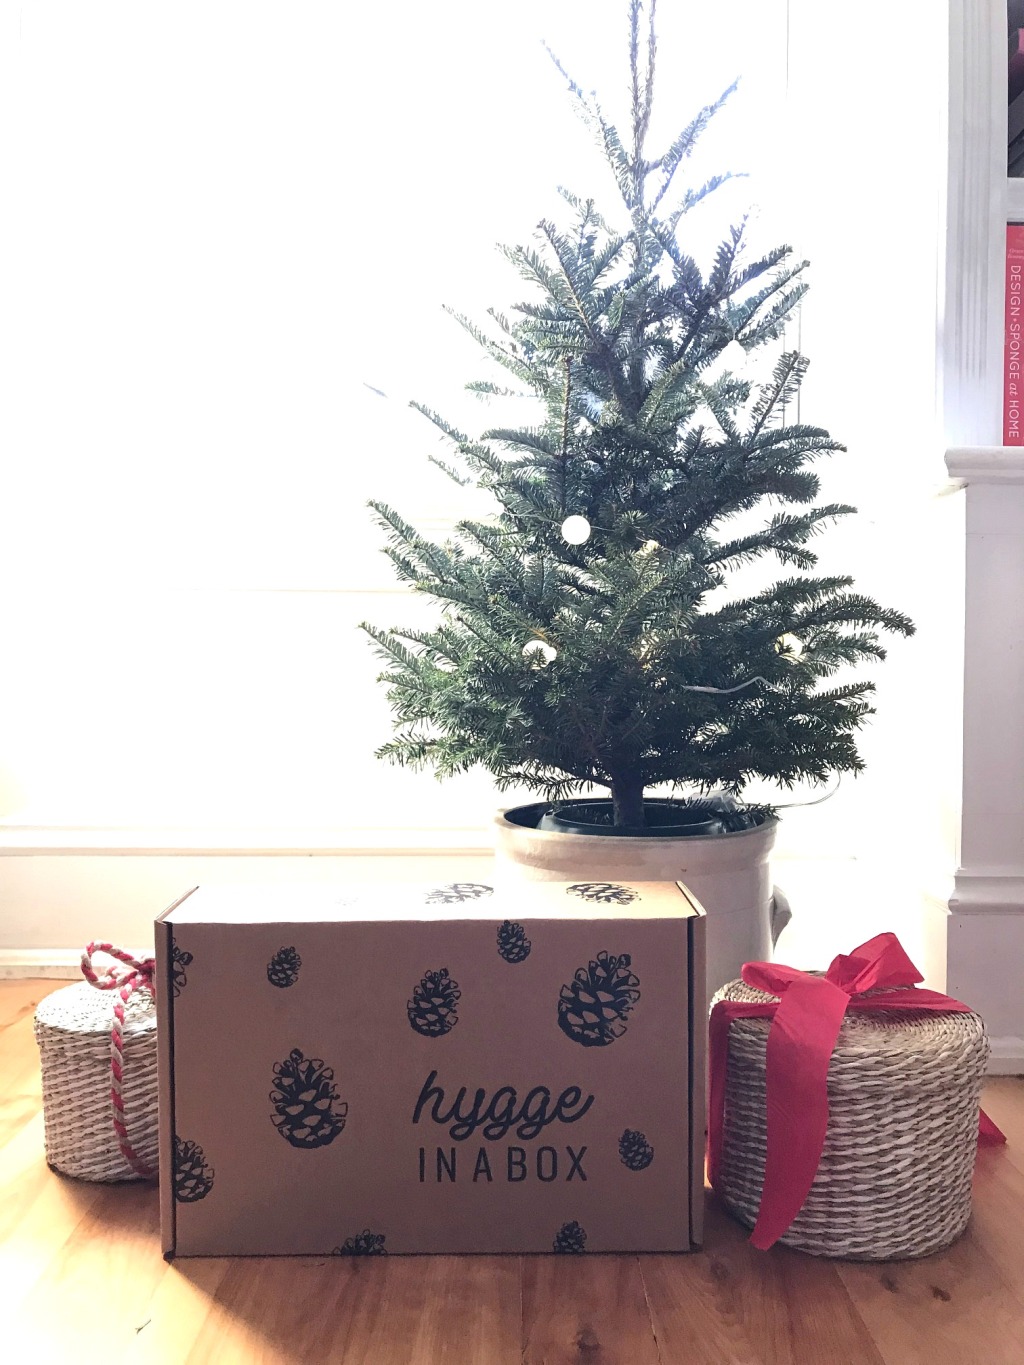 Canadian cozy, curated: The Hygge Holiday Box from Hygge in a Box 🇨🇦